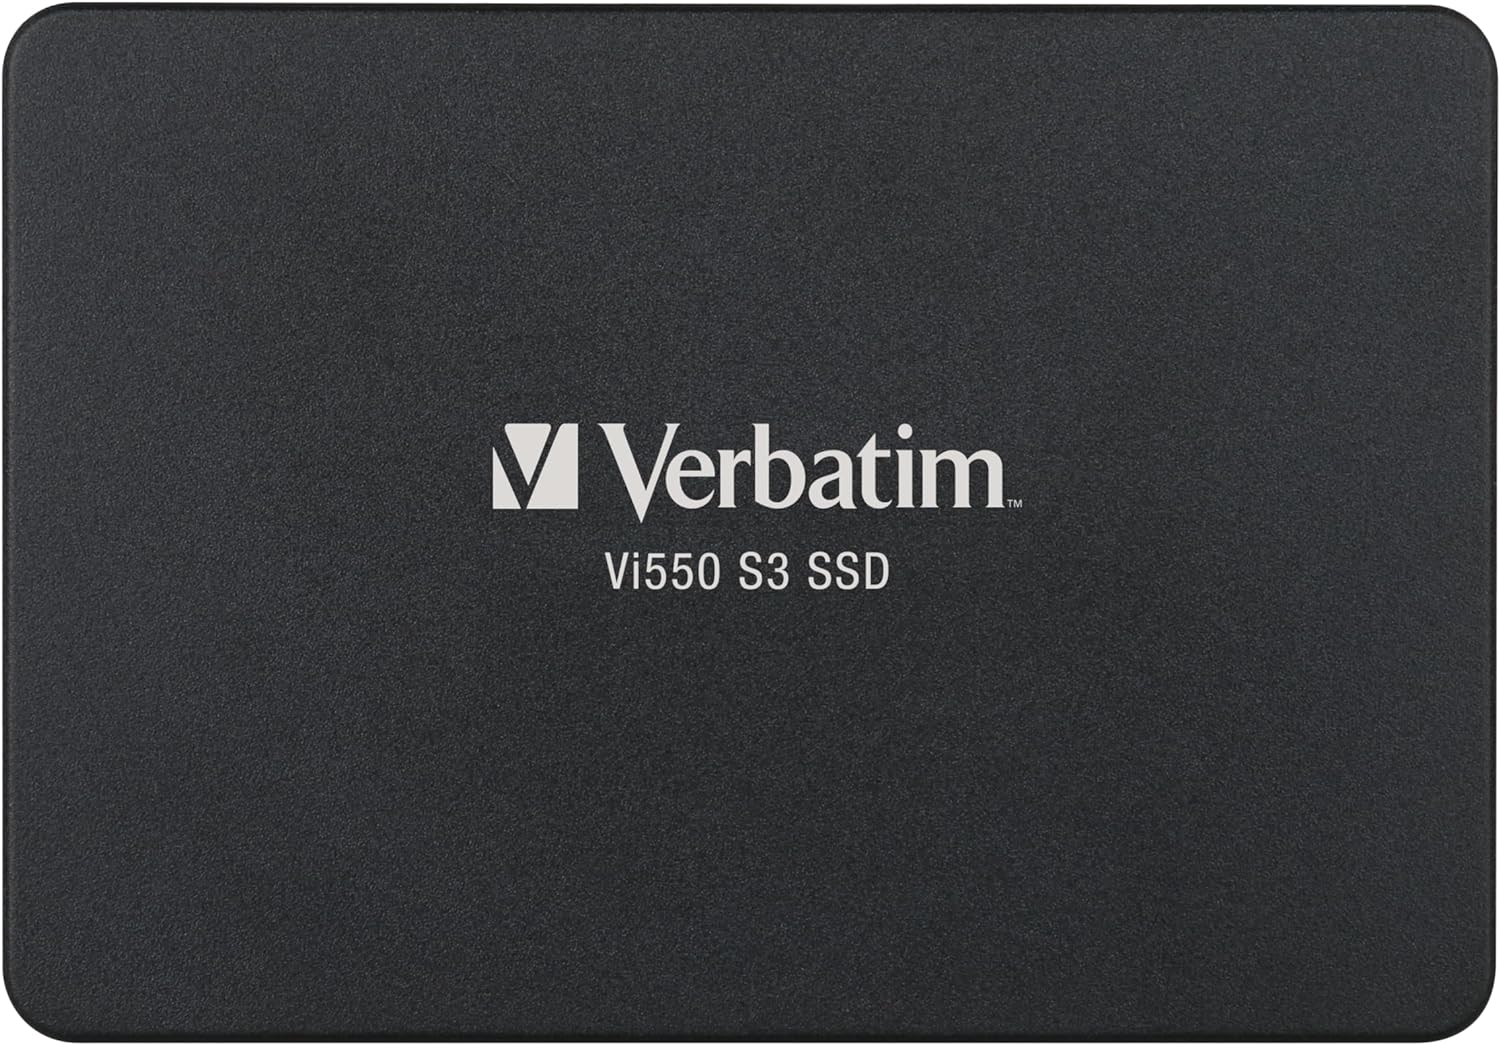 Verbatim 2TB Vi550 2.5 Internal Solid State Drive SSD SATA III Interface with 3D NAND Technology